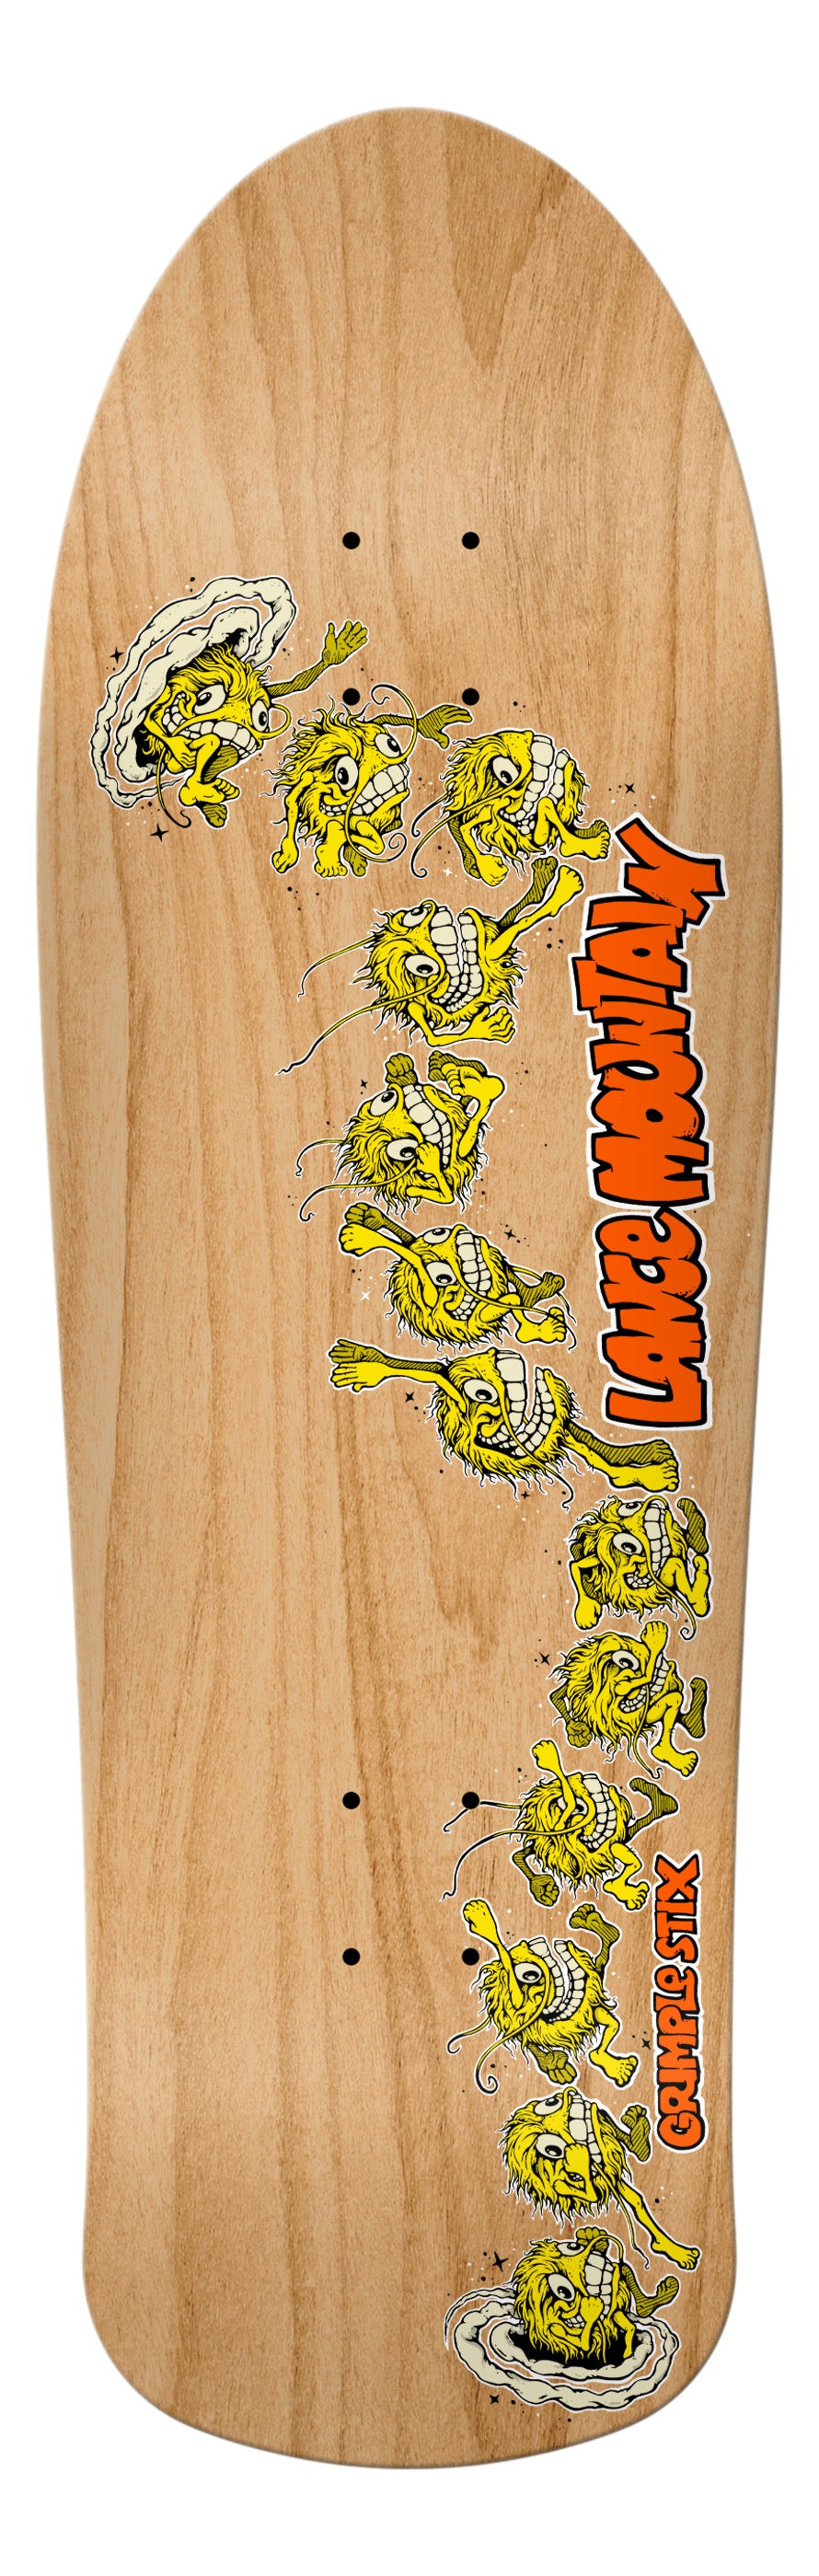 GRIMPLE STIX - LANCE MOUNTAIN'S HAND NUMBERED LIMITED GUEST SKATESHOP DAY DECK (9.83